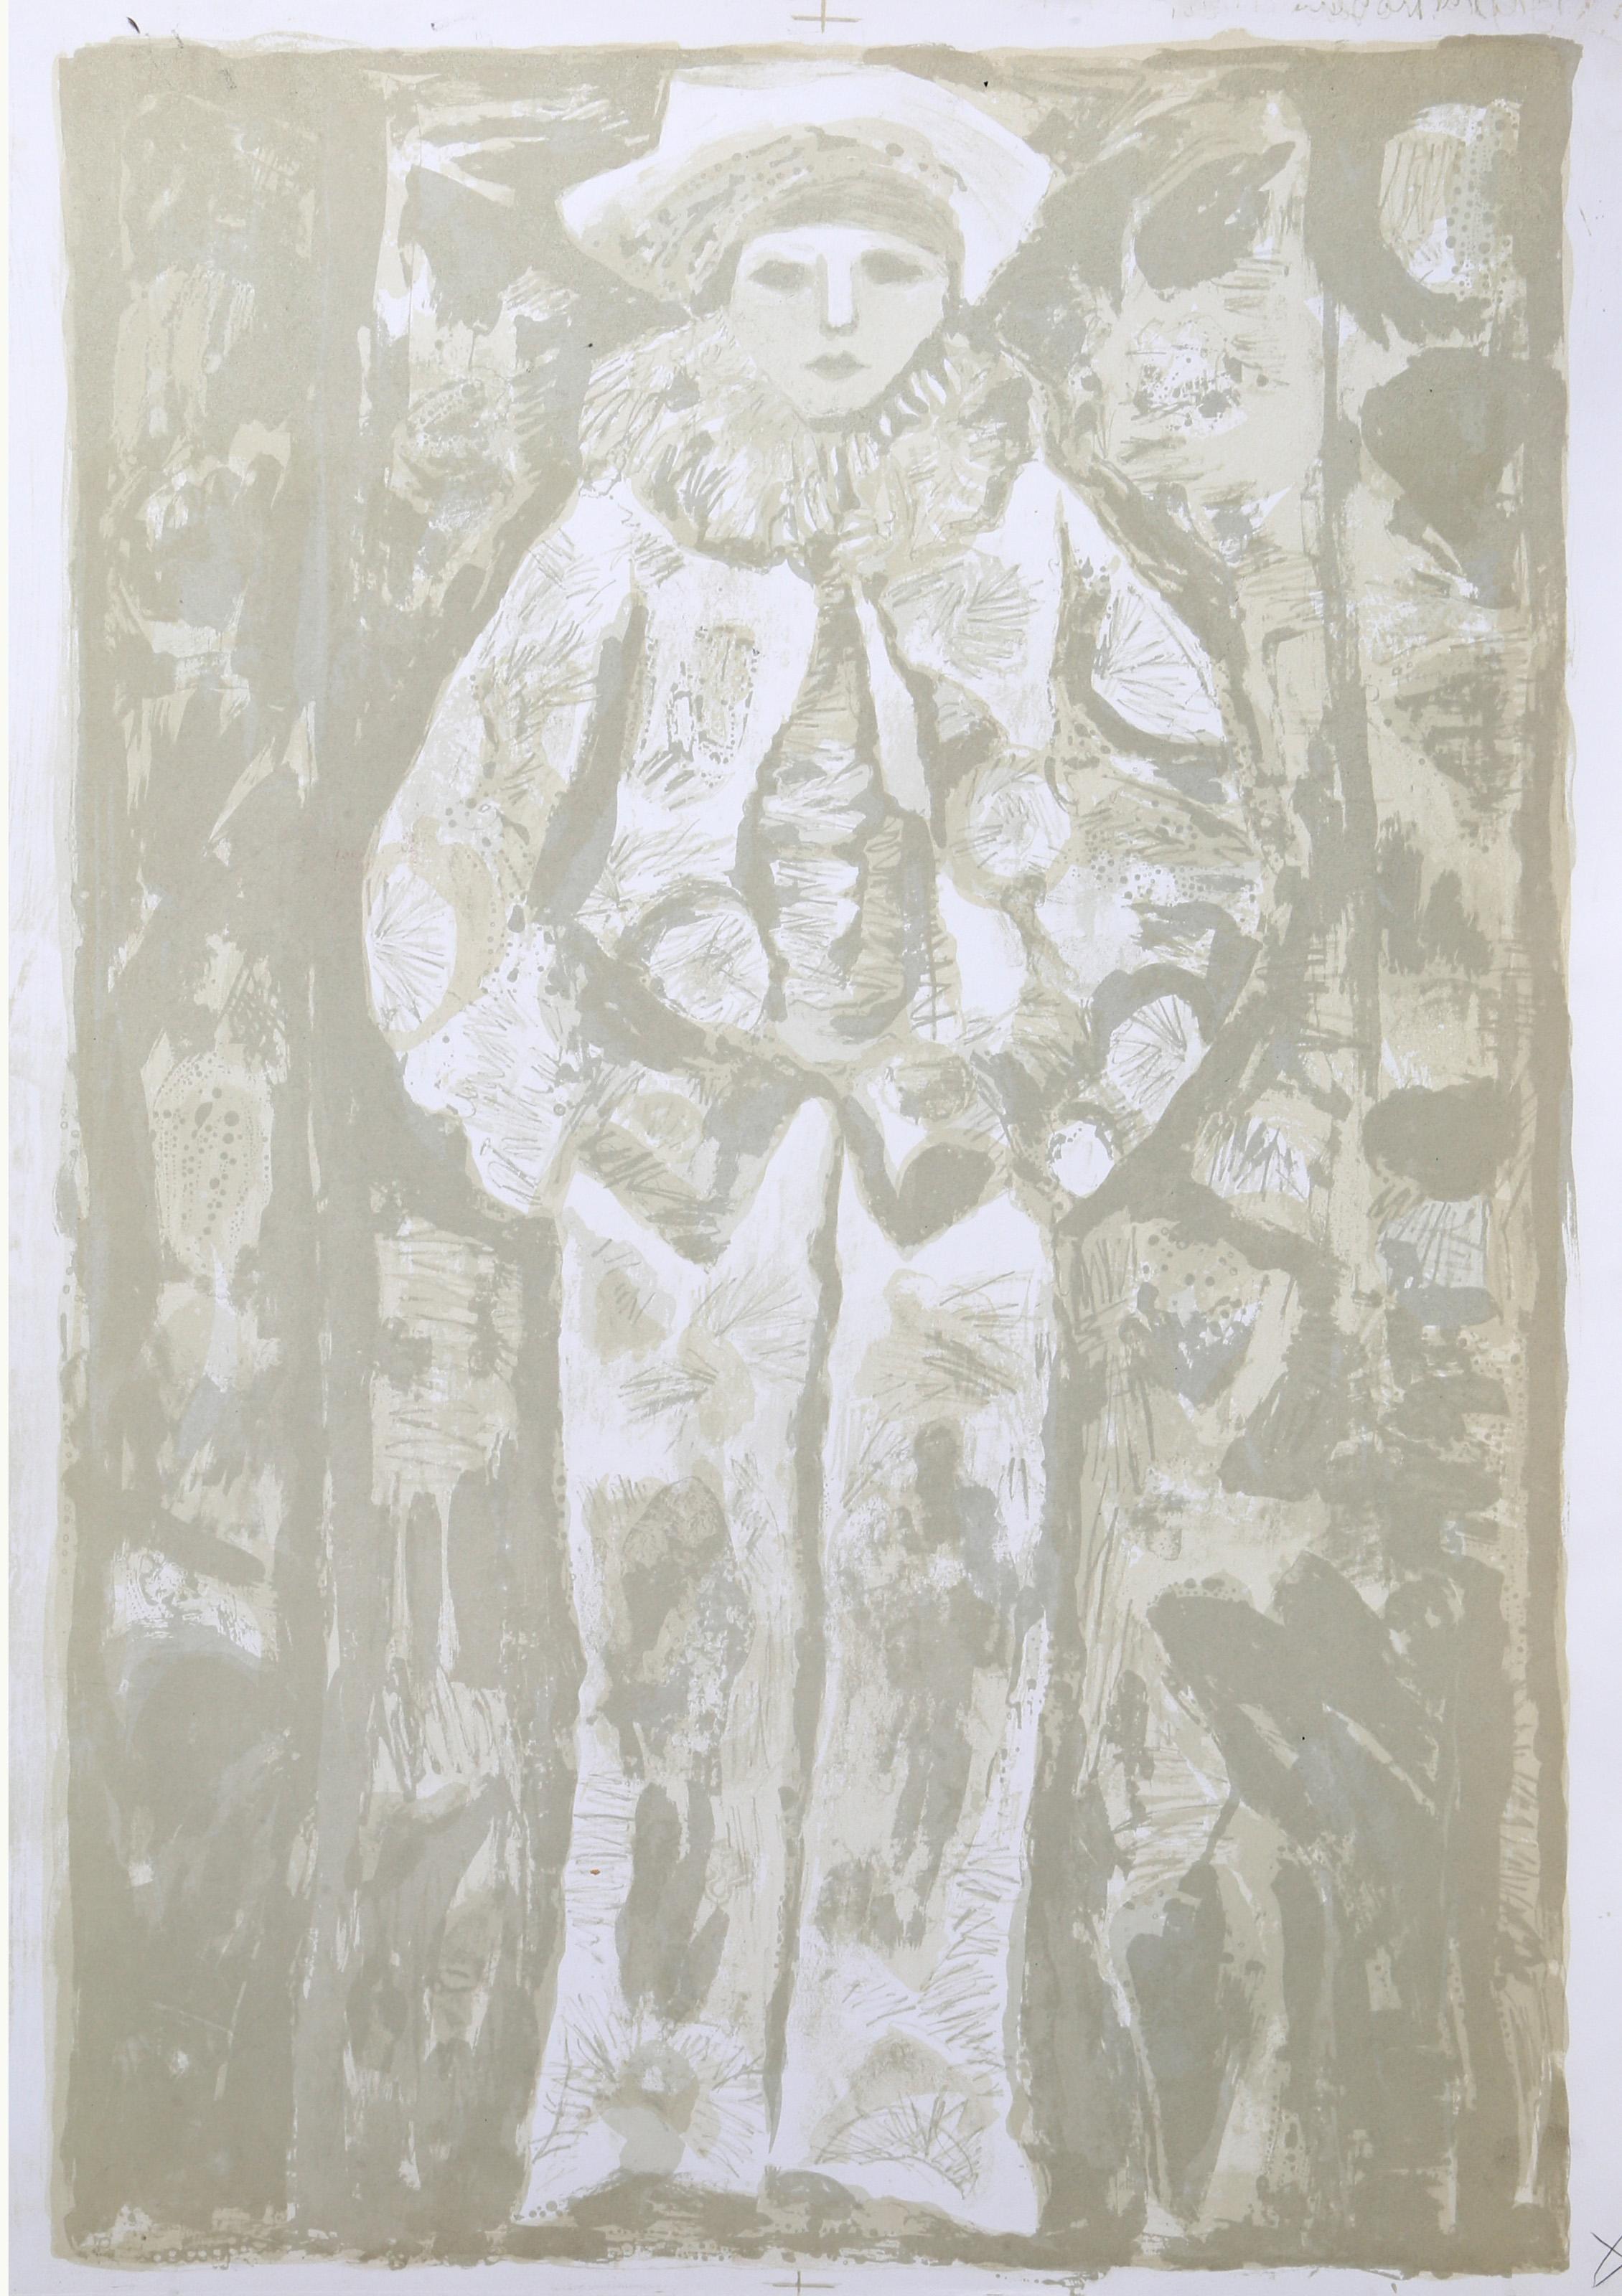 Judith Bledsoe, American (1938 - 2013) -  Clown II. Medium: Screenprint, Edition: AP, Size: 36 x 26 in. (91.44 x 66.04 cm), Description: Standing with his hands tucked into his pockets, the clown wearing a white costume with red hair stands against